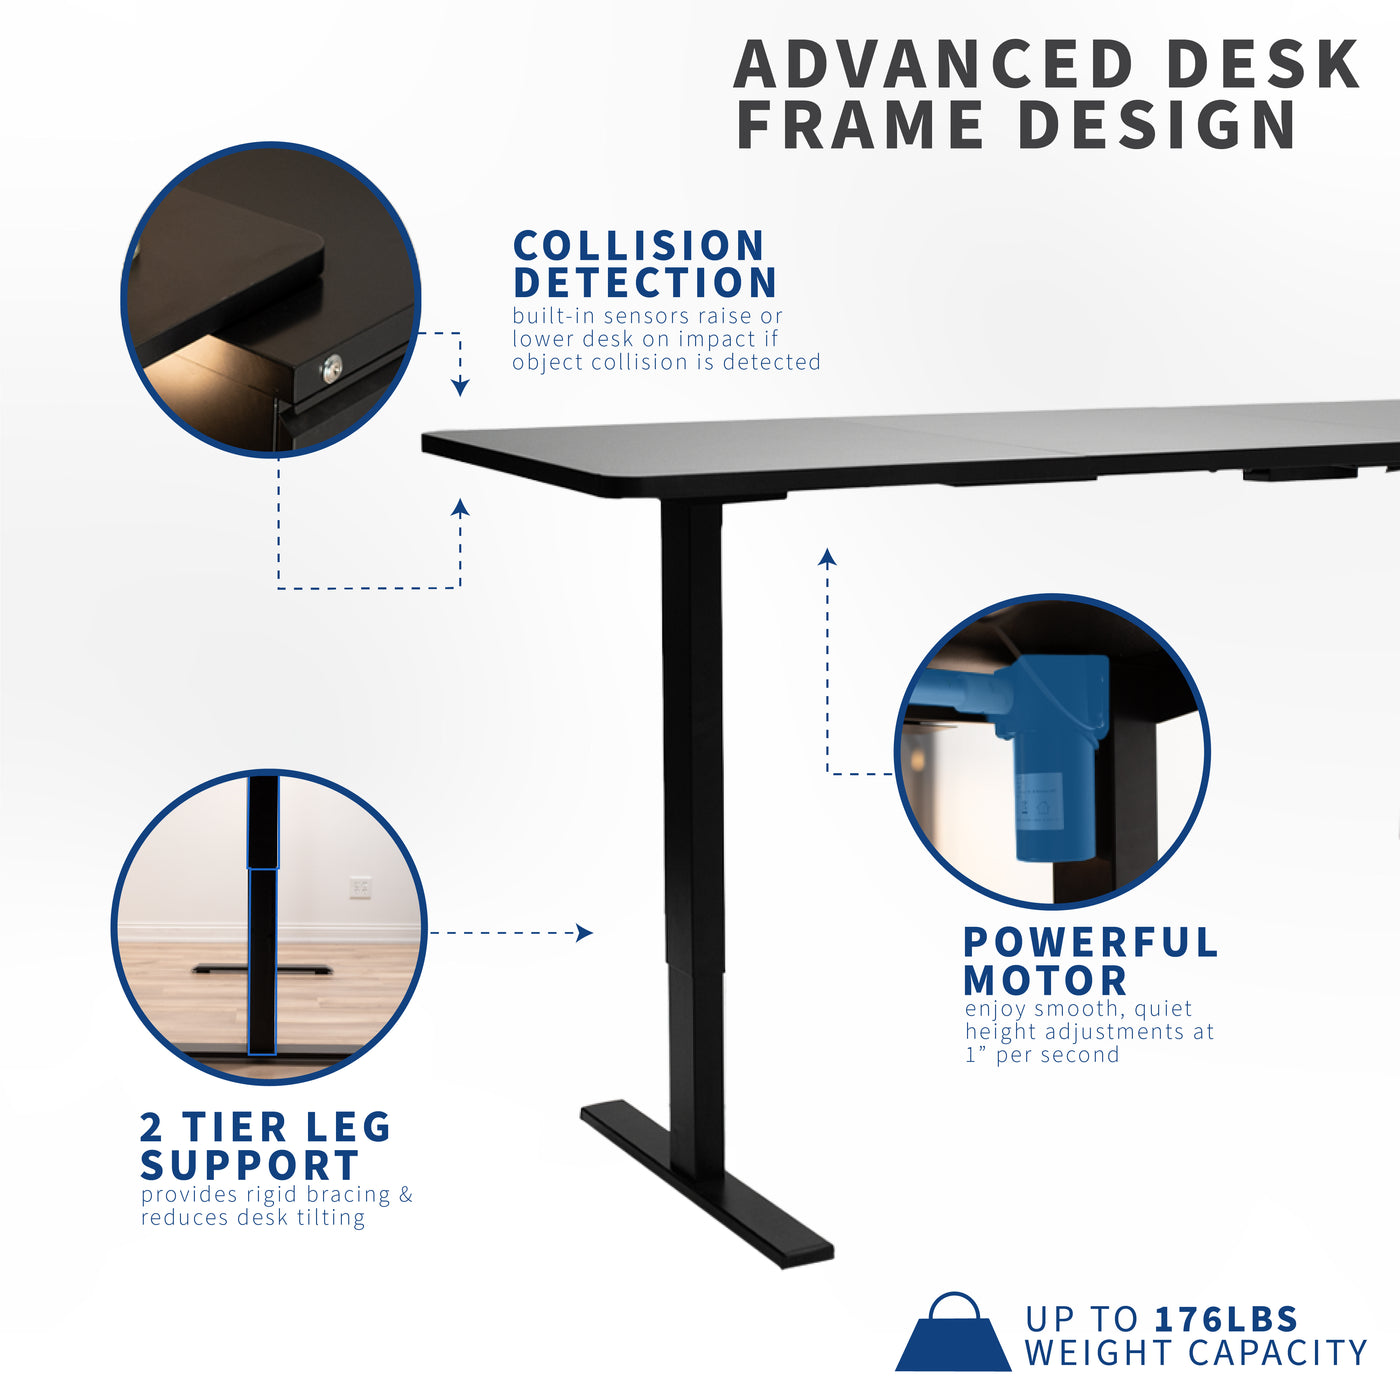 Advanced desk with a powerful motor and collision detection and sturdy support to support work equipment.